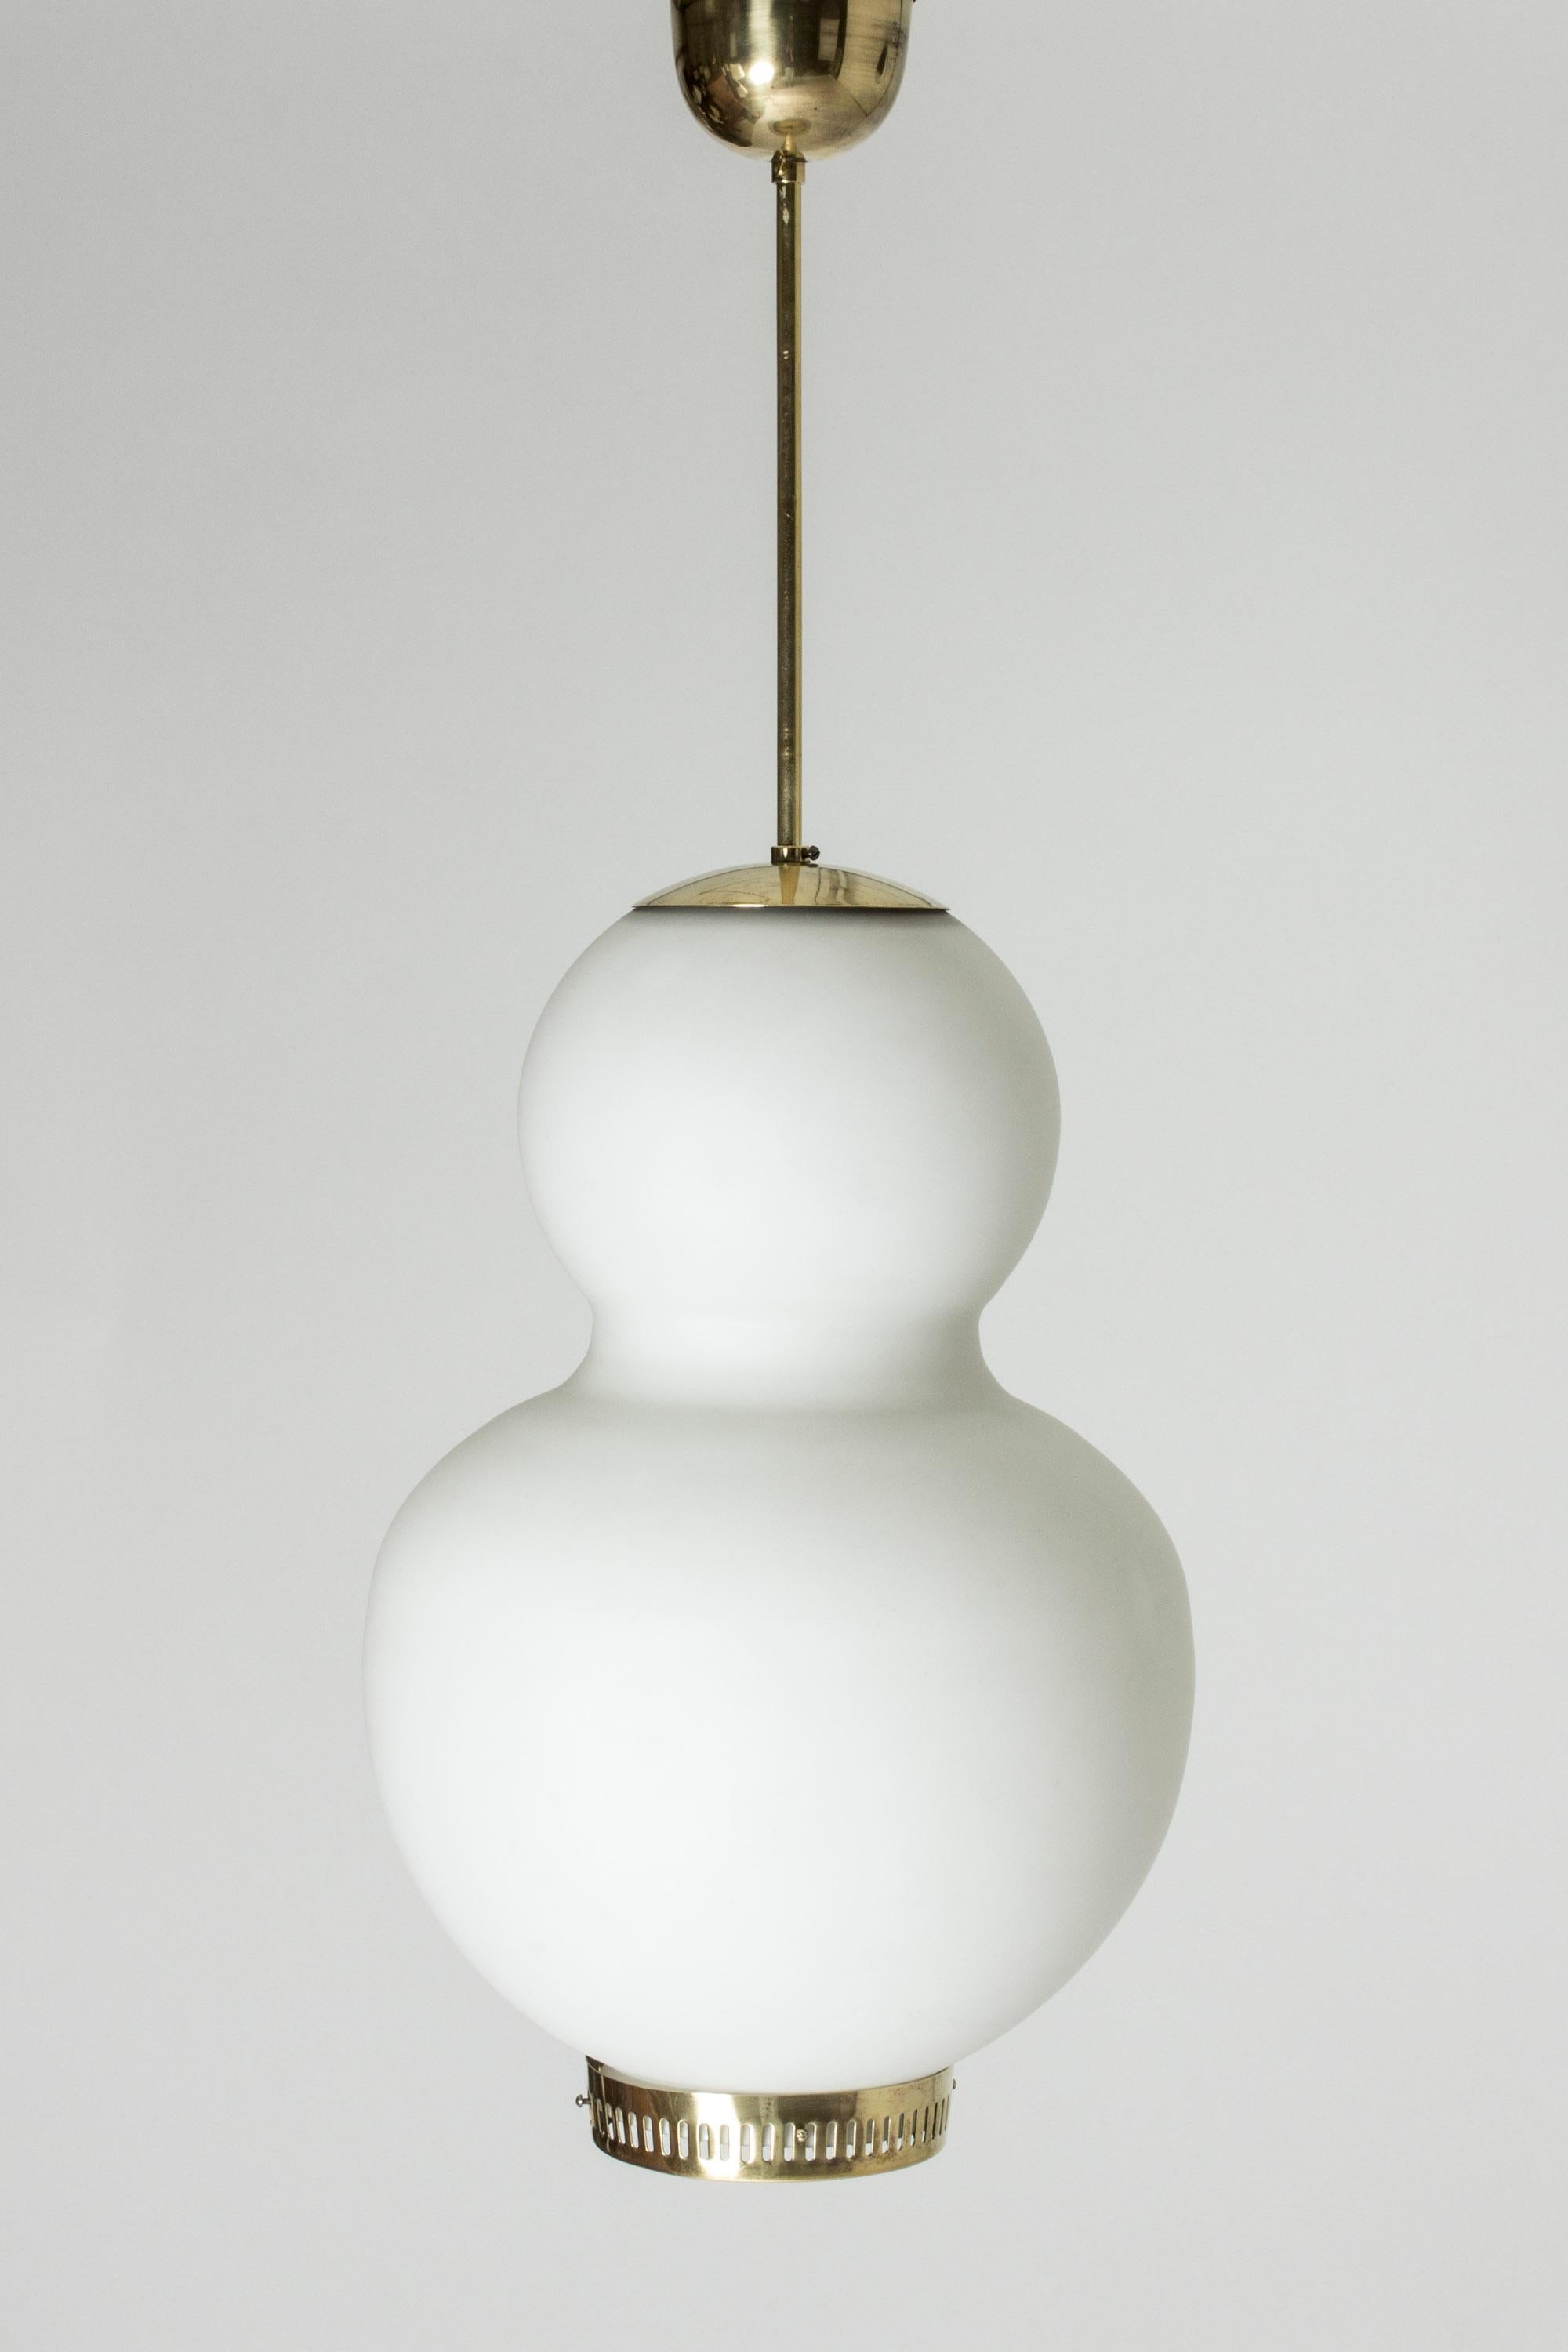 Beautiful Danish modern opaline glass and brass ceiling light by Bent Karlby. Streamlined bulbous form with a slim waist. Brass details at the top and the bottom.